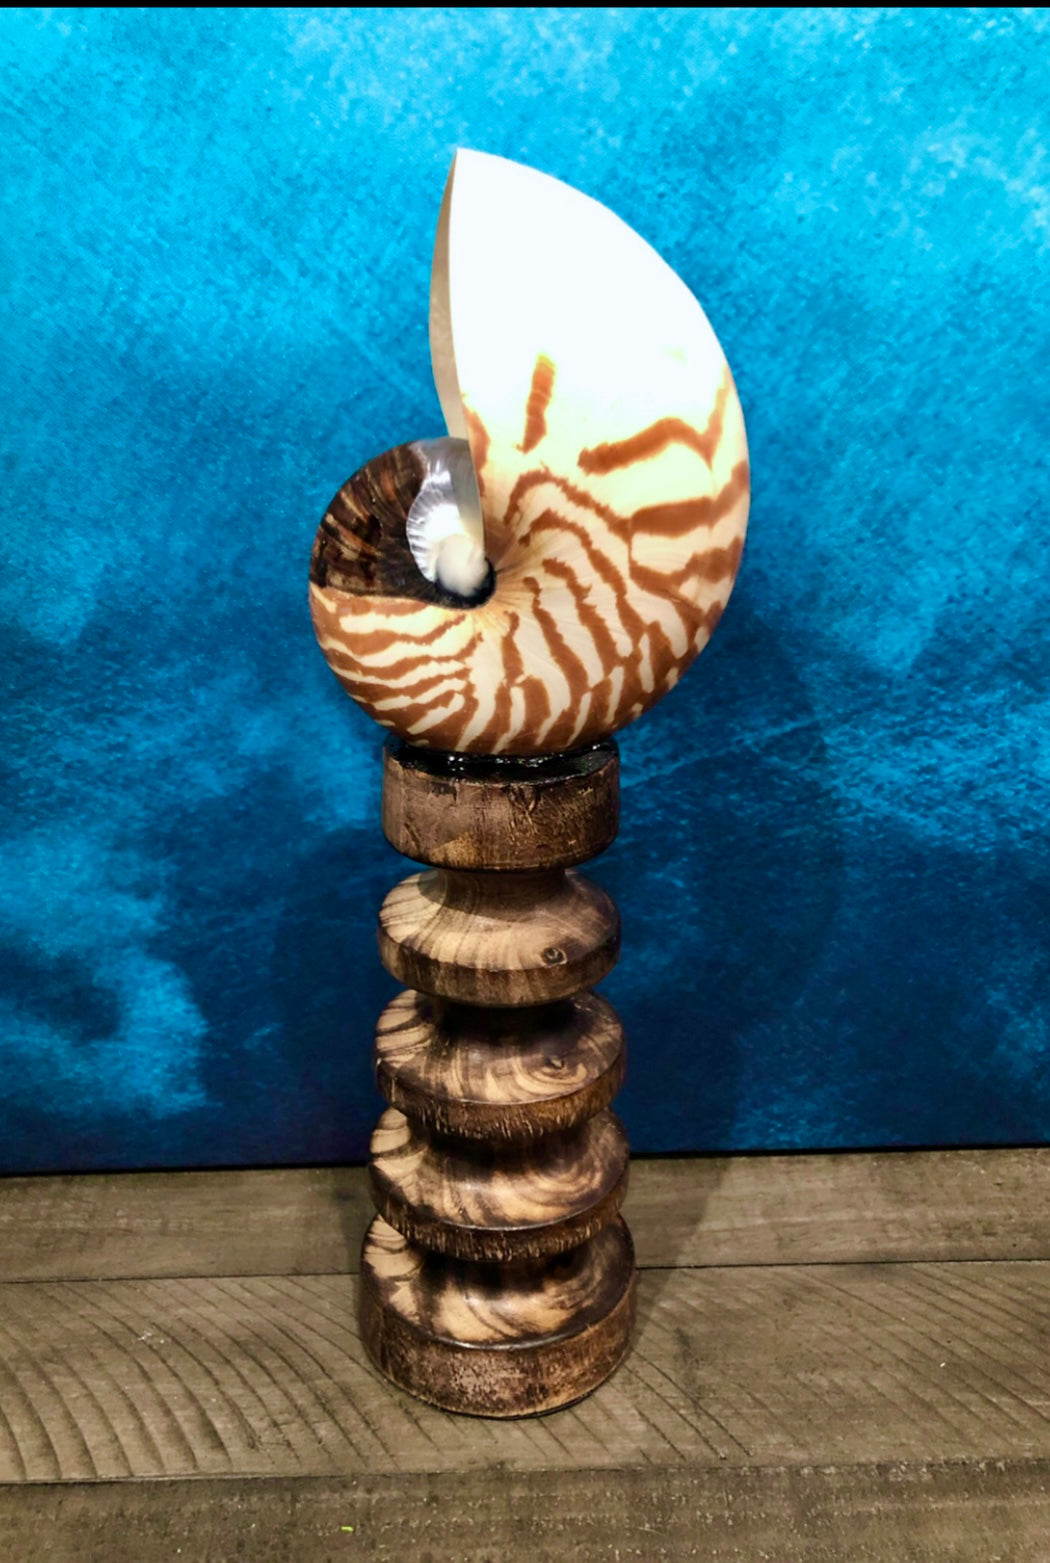 Tiger Nautilus Shell on a Wooden Stand - Treasures from Beneath